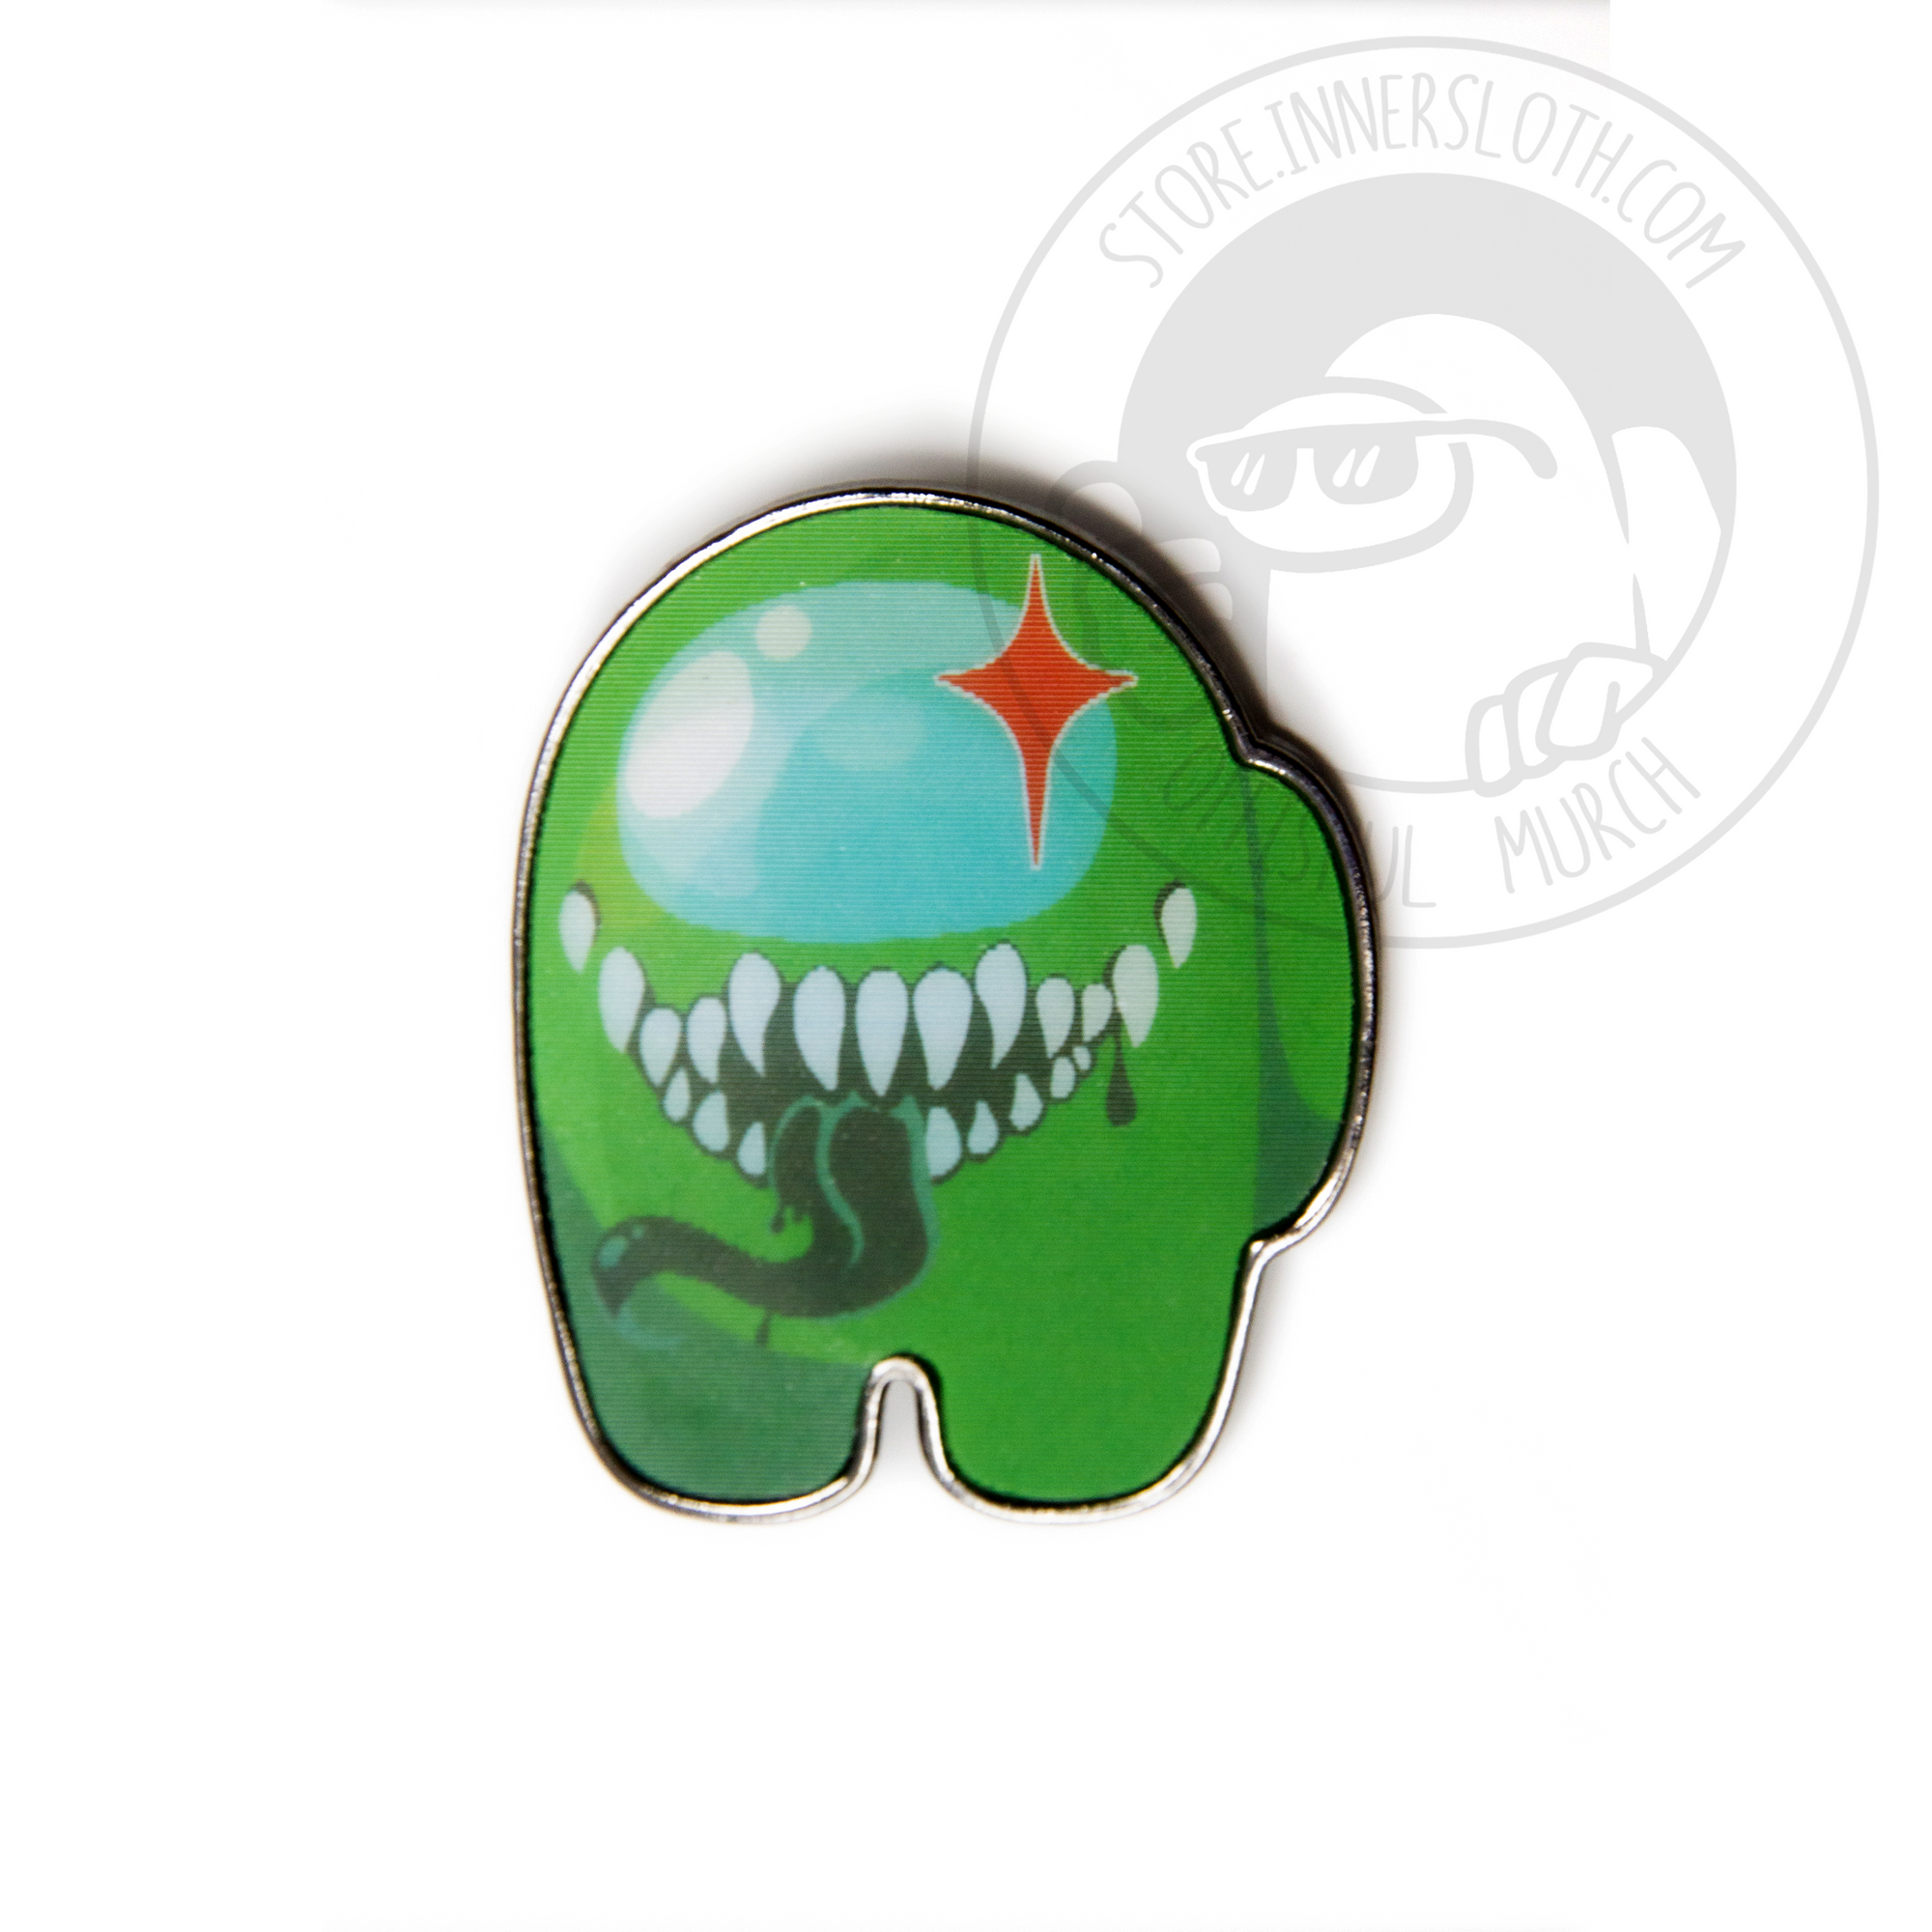 An animated gif of the lenticular Impostor pin, which shows a green crewmate. The image dissolves back and forth showing the green crewmate, and then the green Impostor with grinning sharp teeth, tongue, and red Impostor shine.